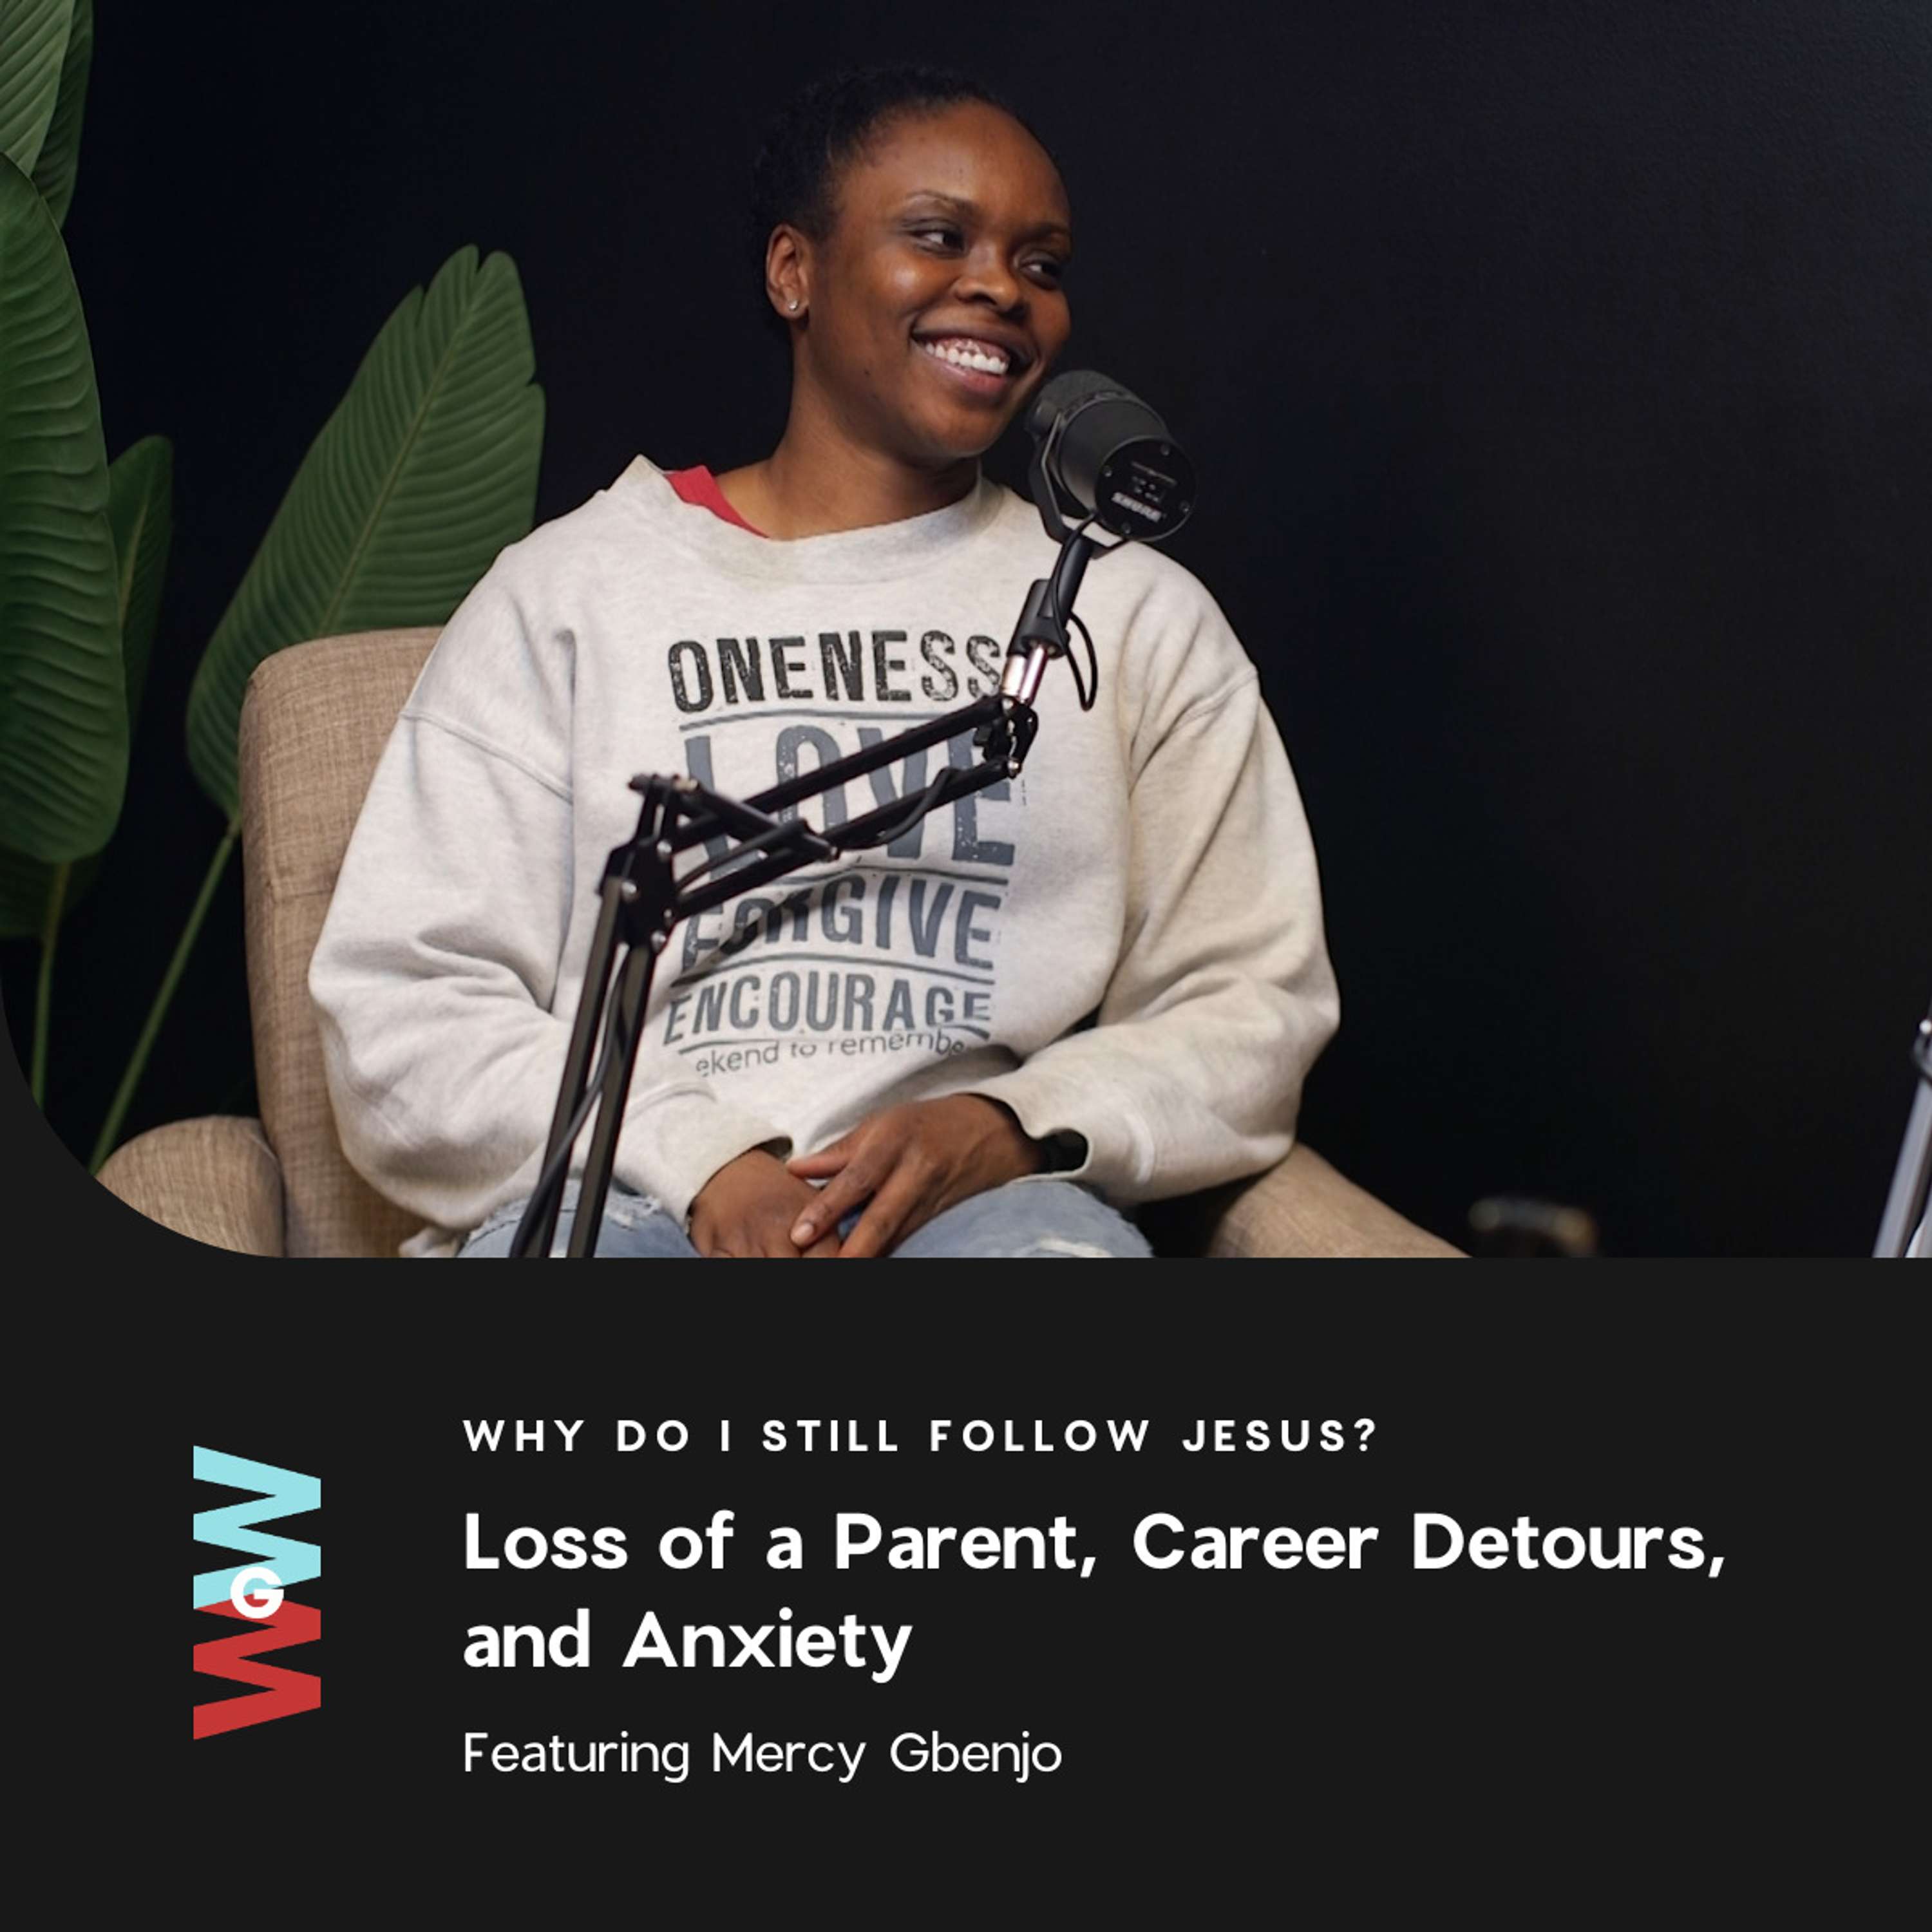 Mercy Gbenjo - Why Do I Still Follow Jesus? (Loss of a Parent, Career Detours, and Anxiety)